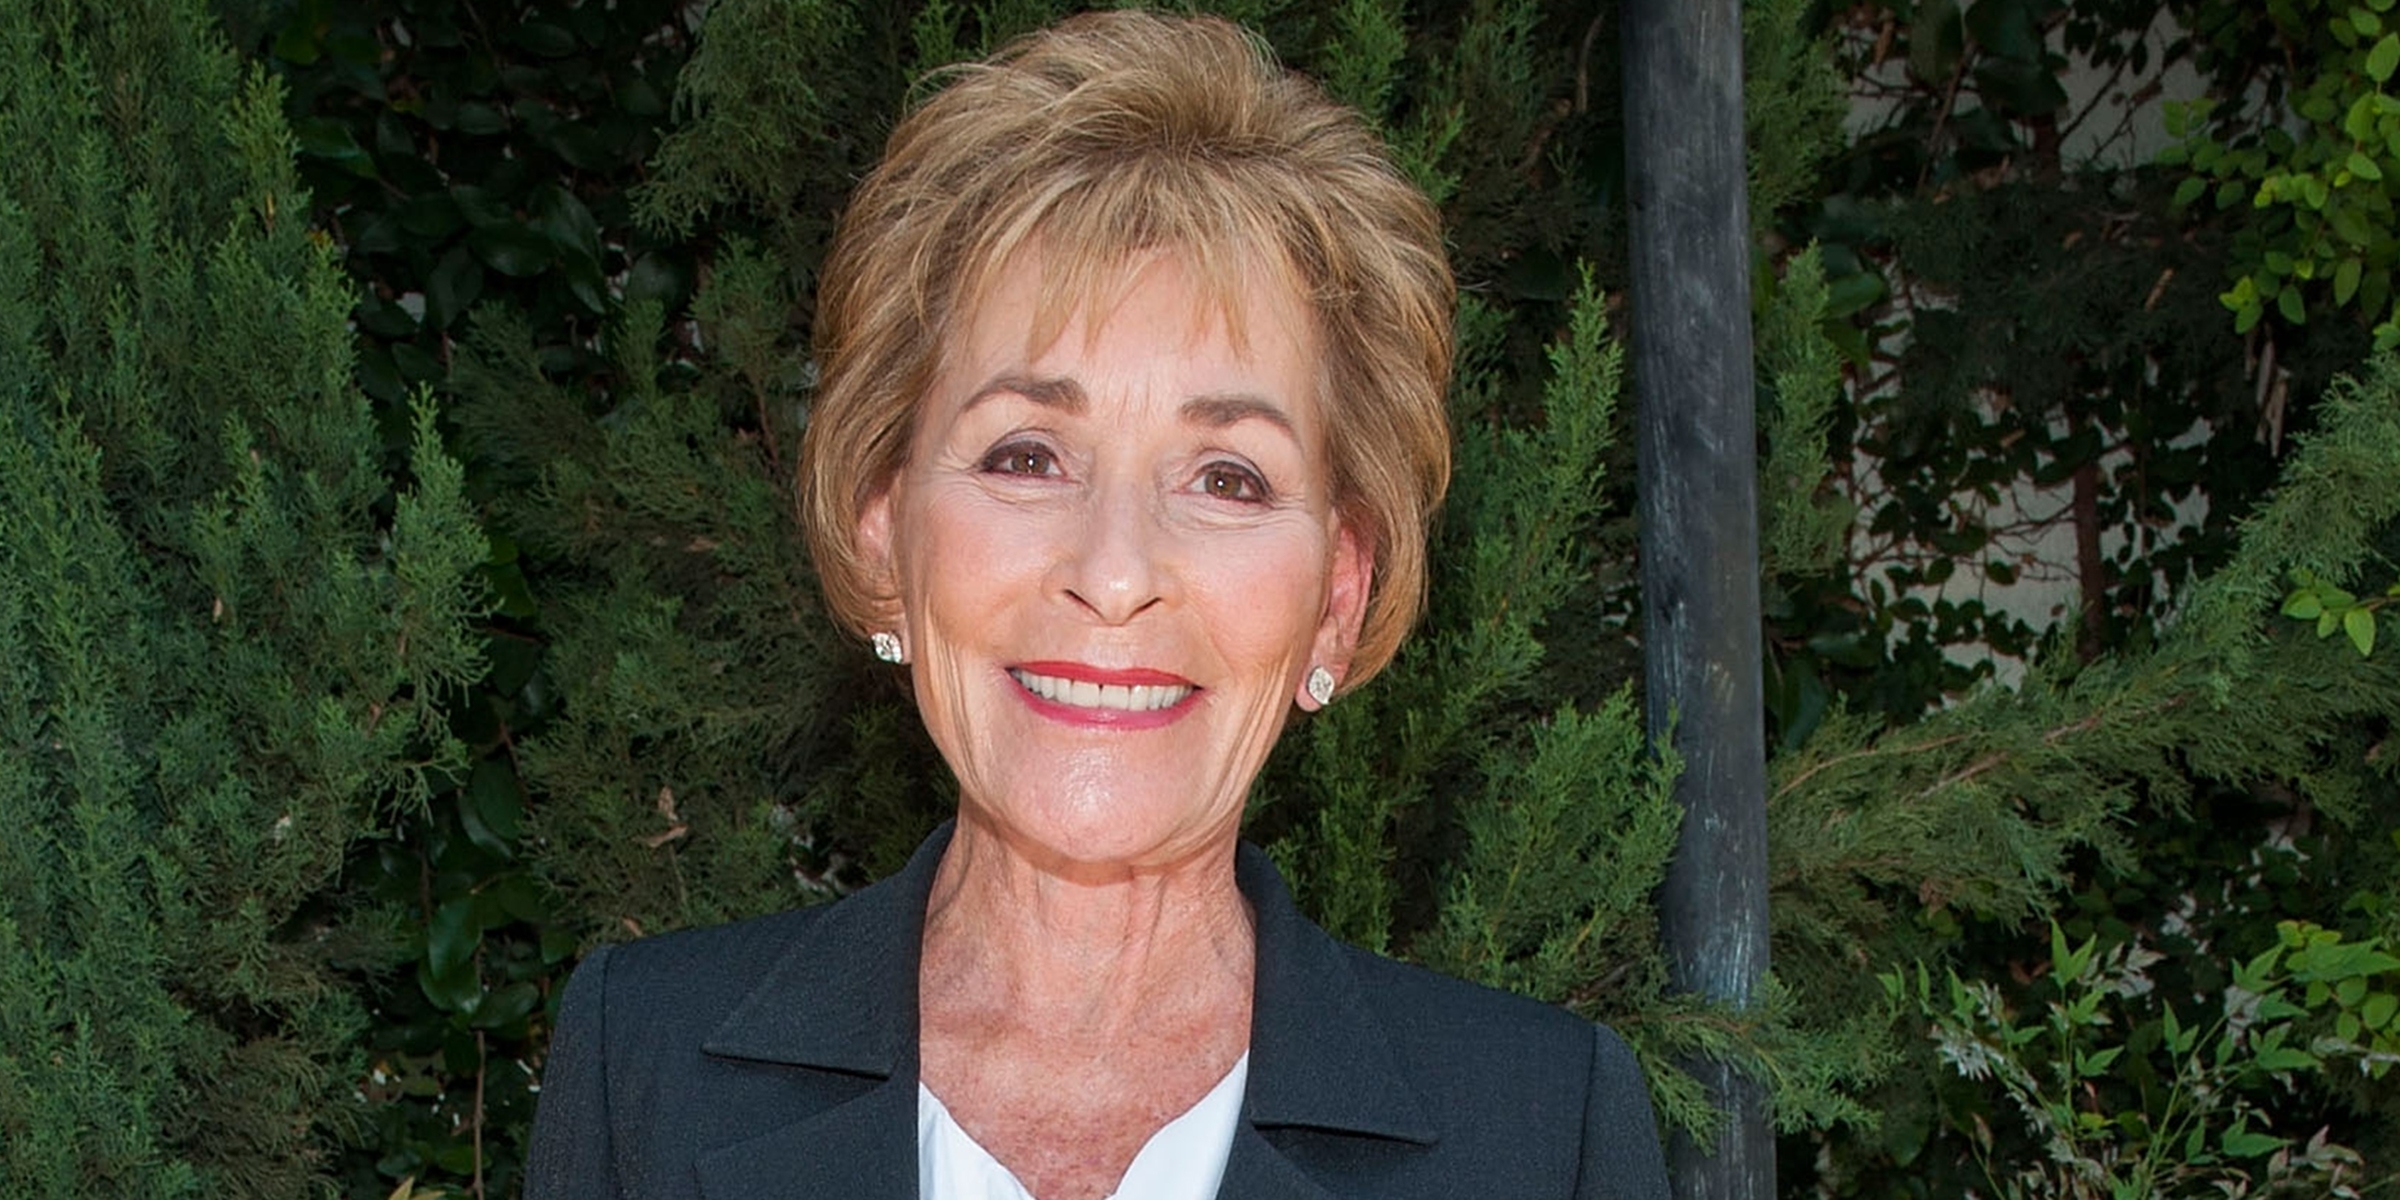 Judge Judy Changed Her Hairstyle — And Her Bailiff Has An pertaining to Has Judge Judy Let Her Hair Grow Out